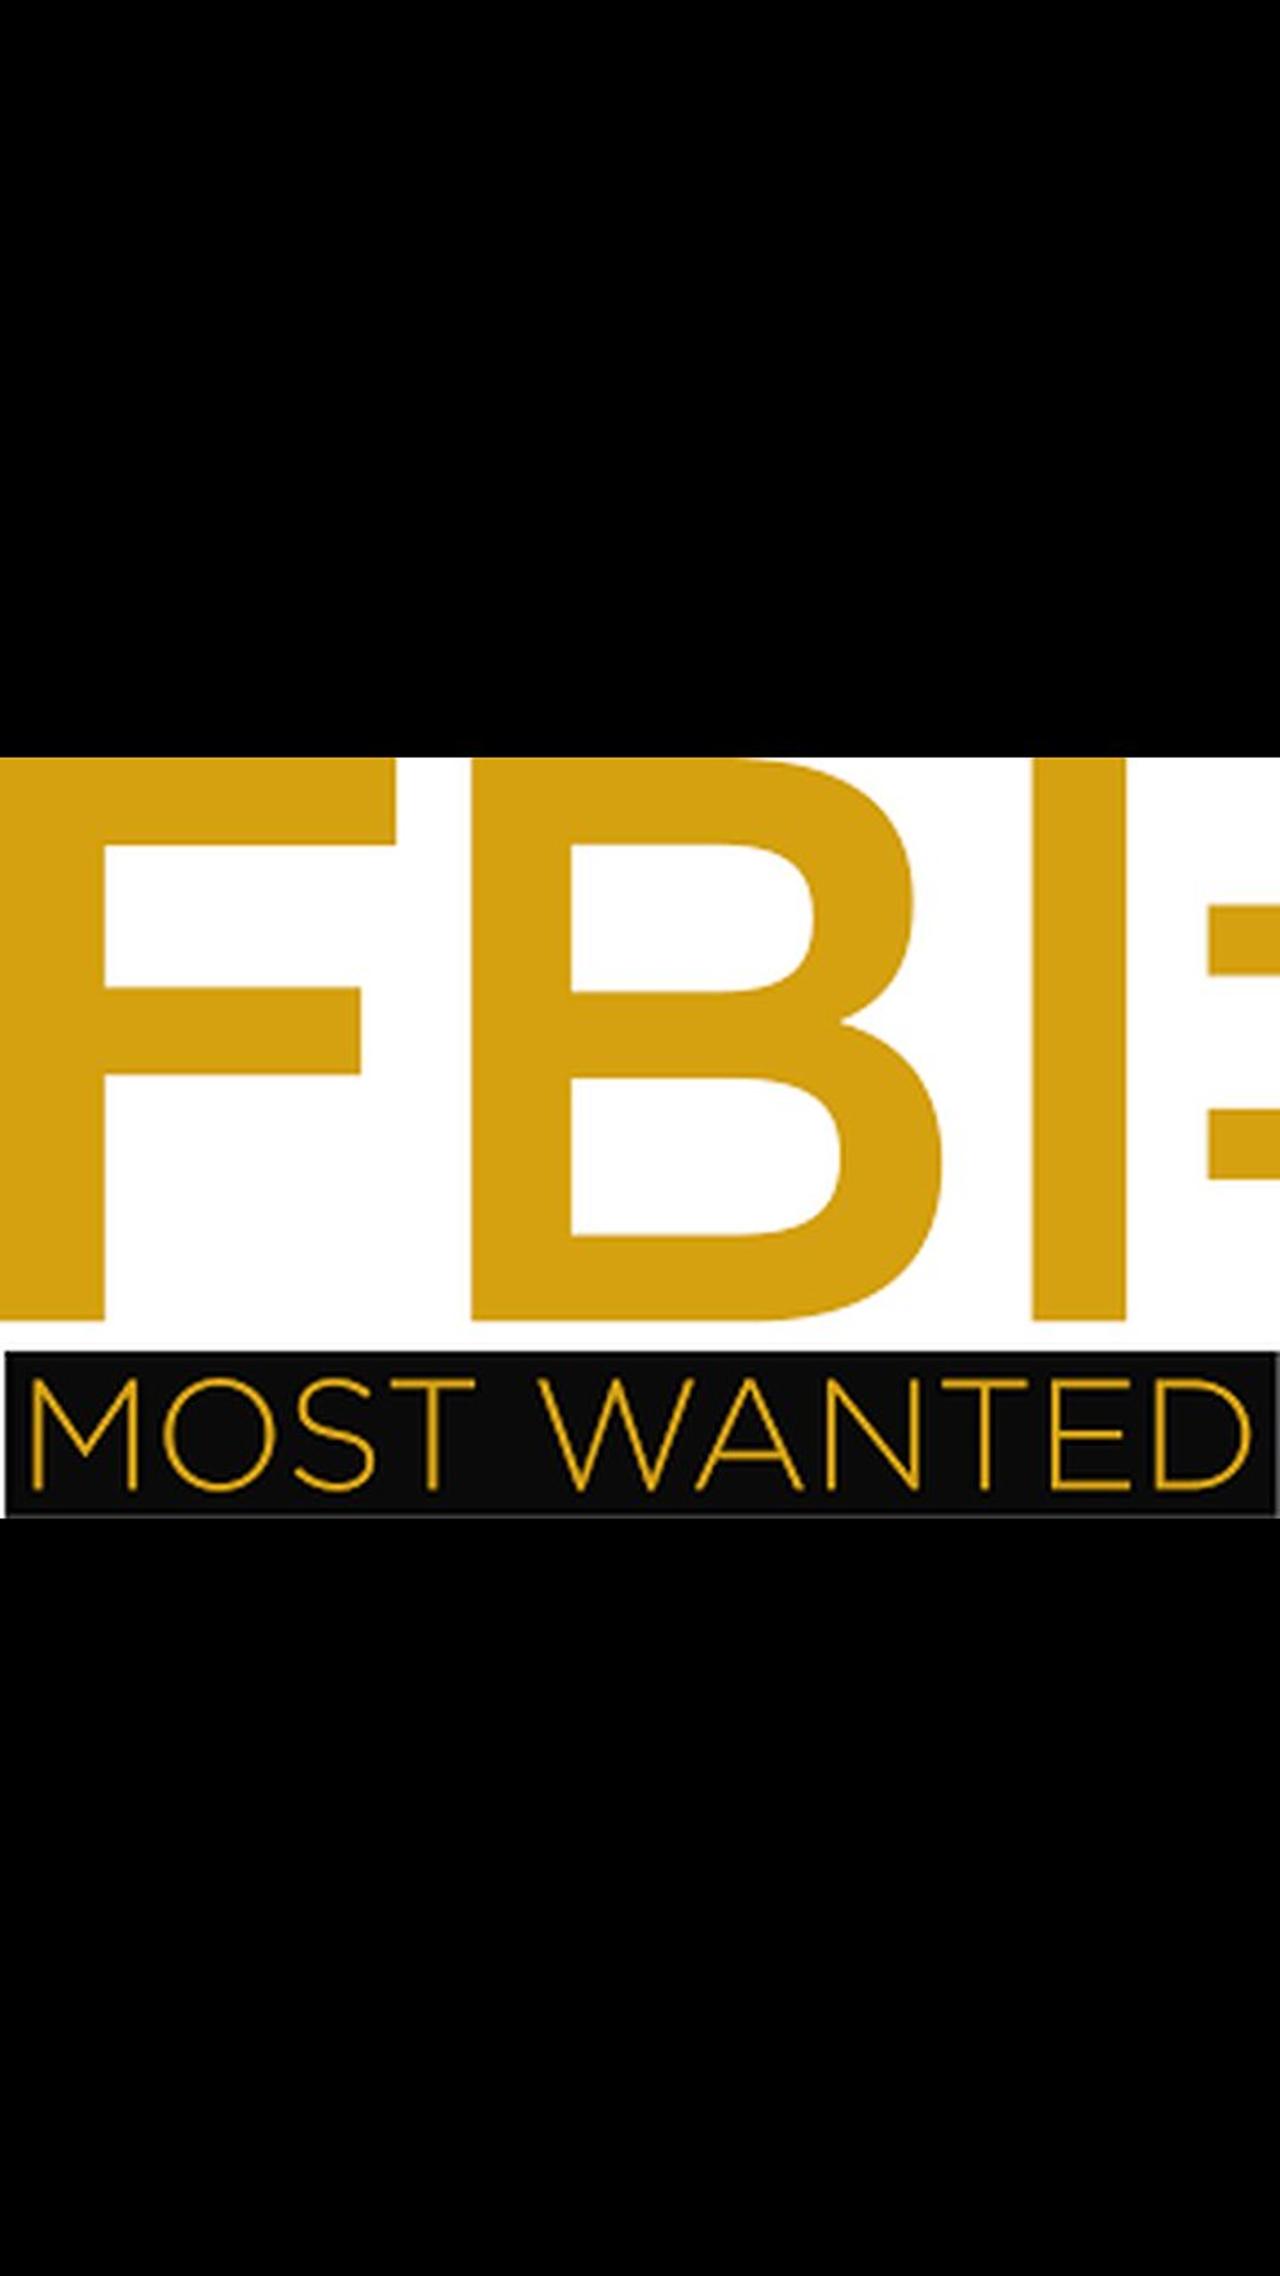 Chad Hower, FBI and Interpol's Most Wanted Fugitive, but He's Innocent